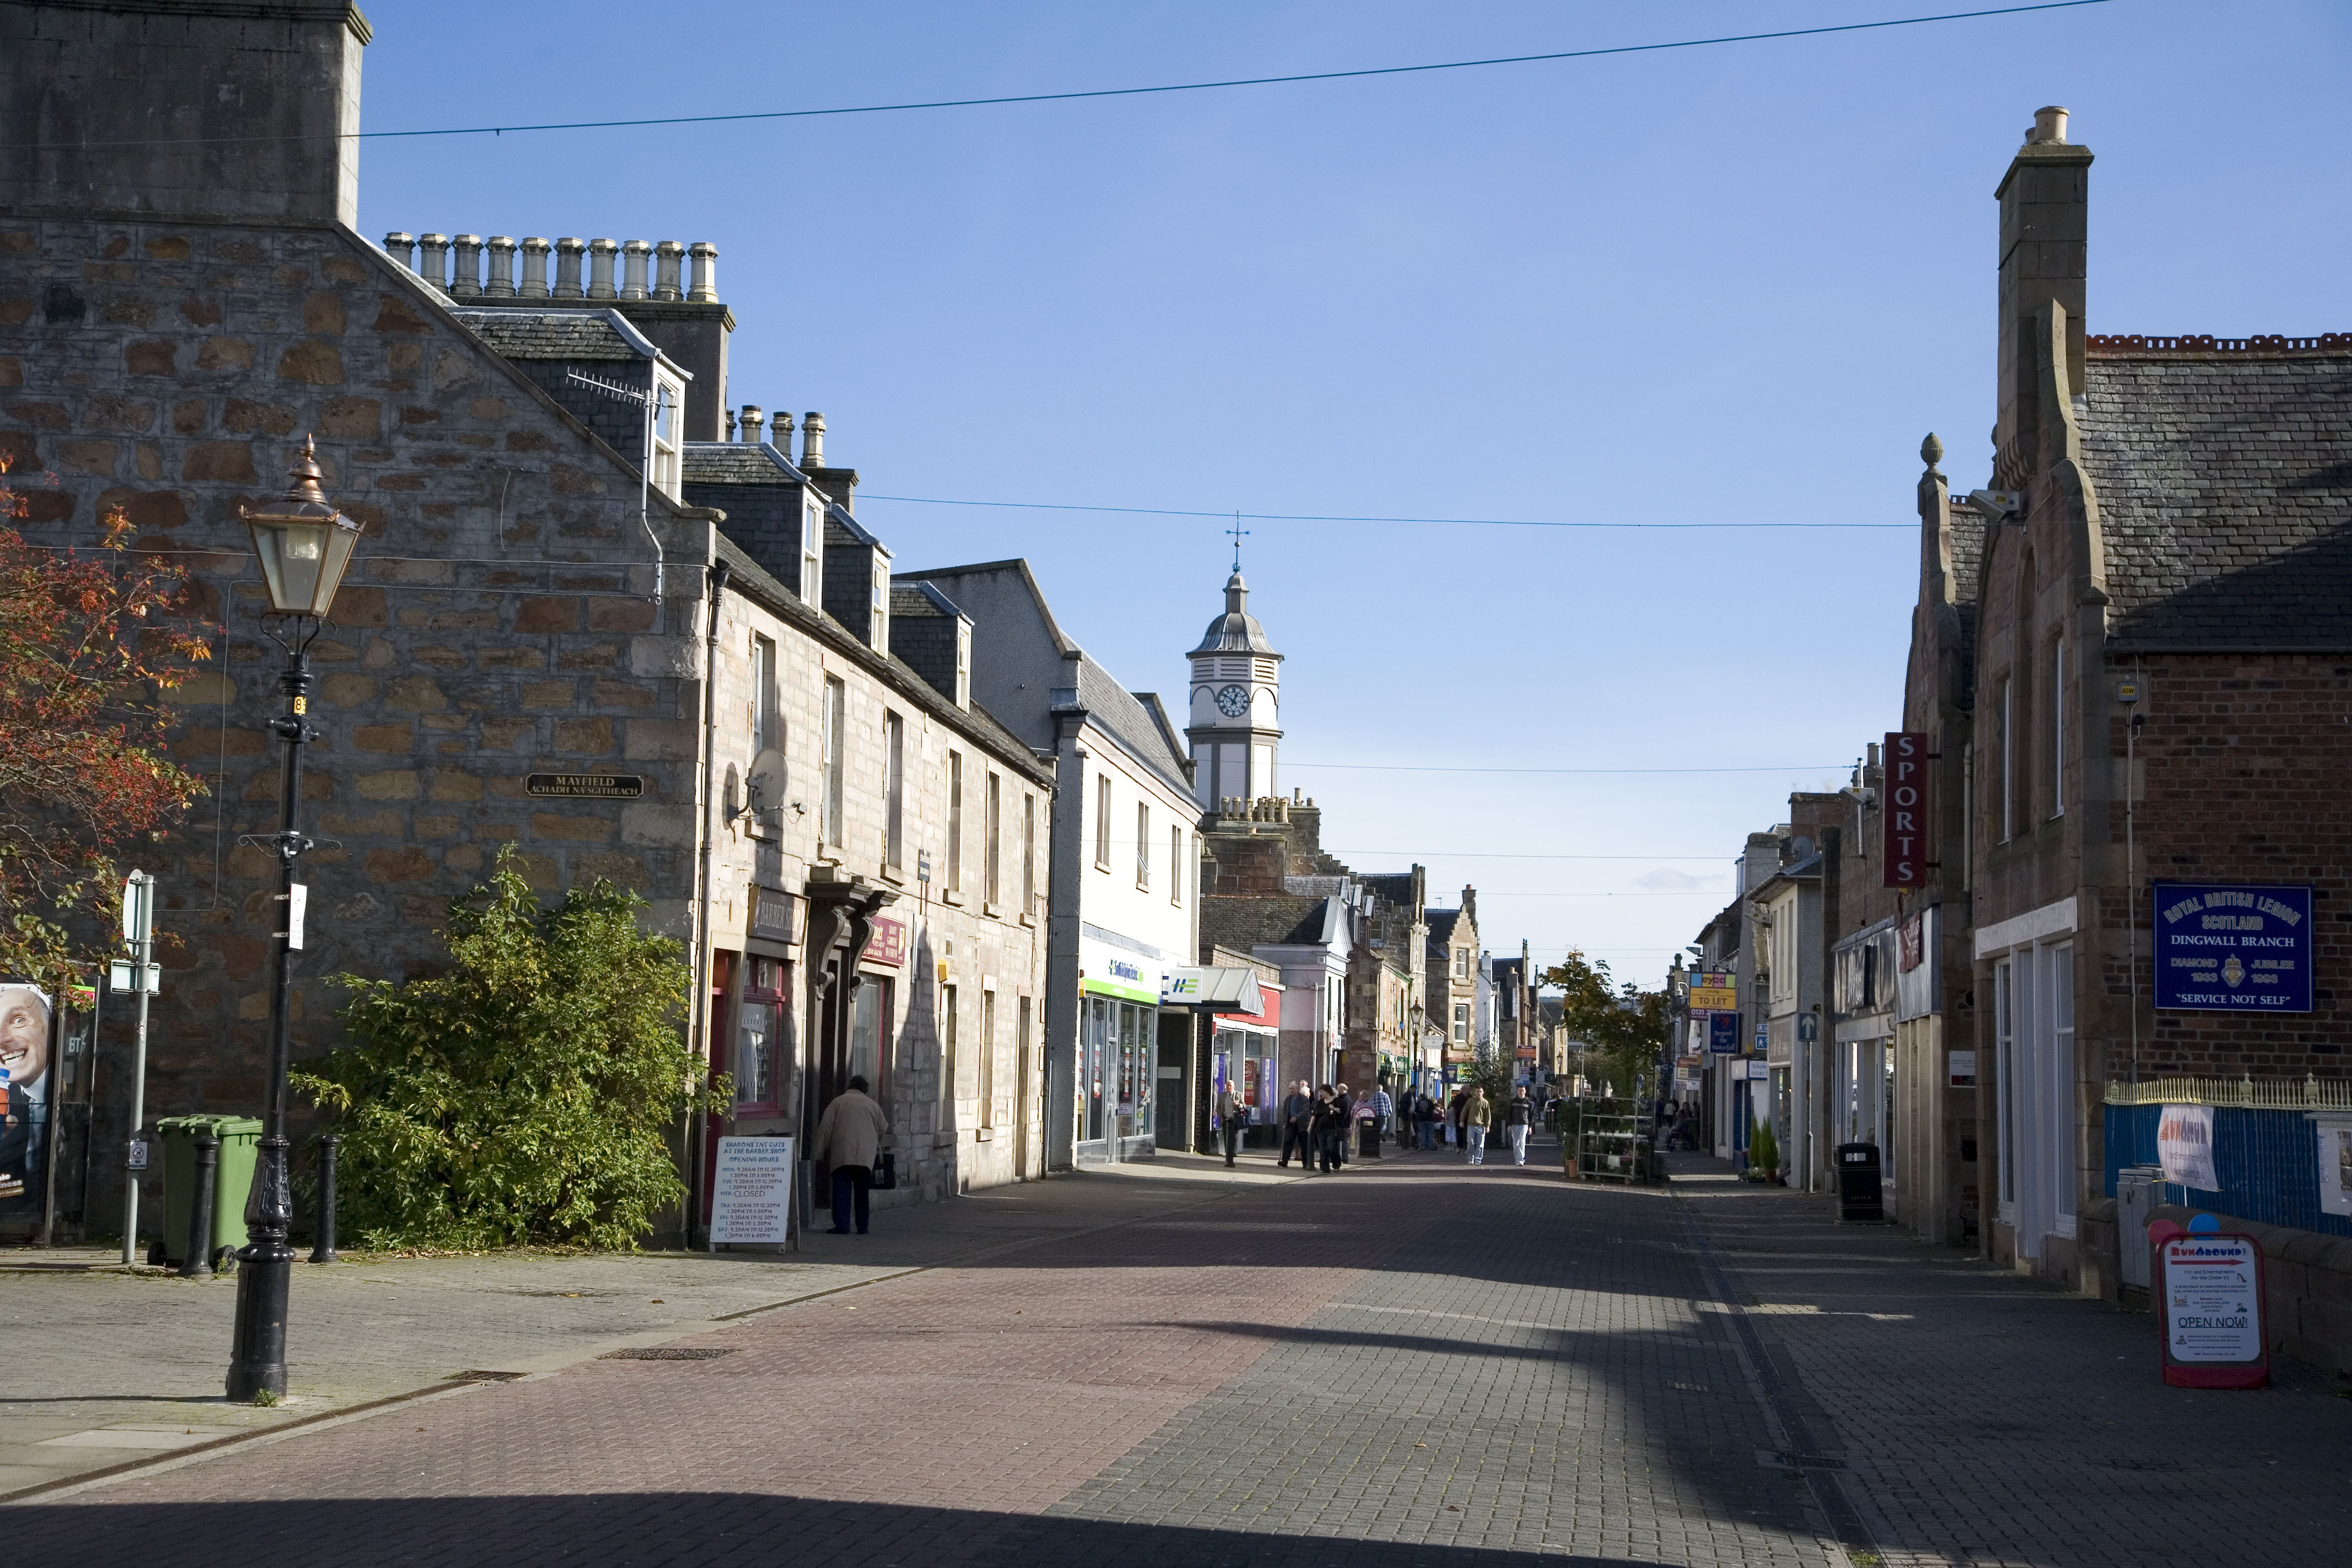 The pedestrianised main street through Dingwall, with the clock tower of the town hall visible